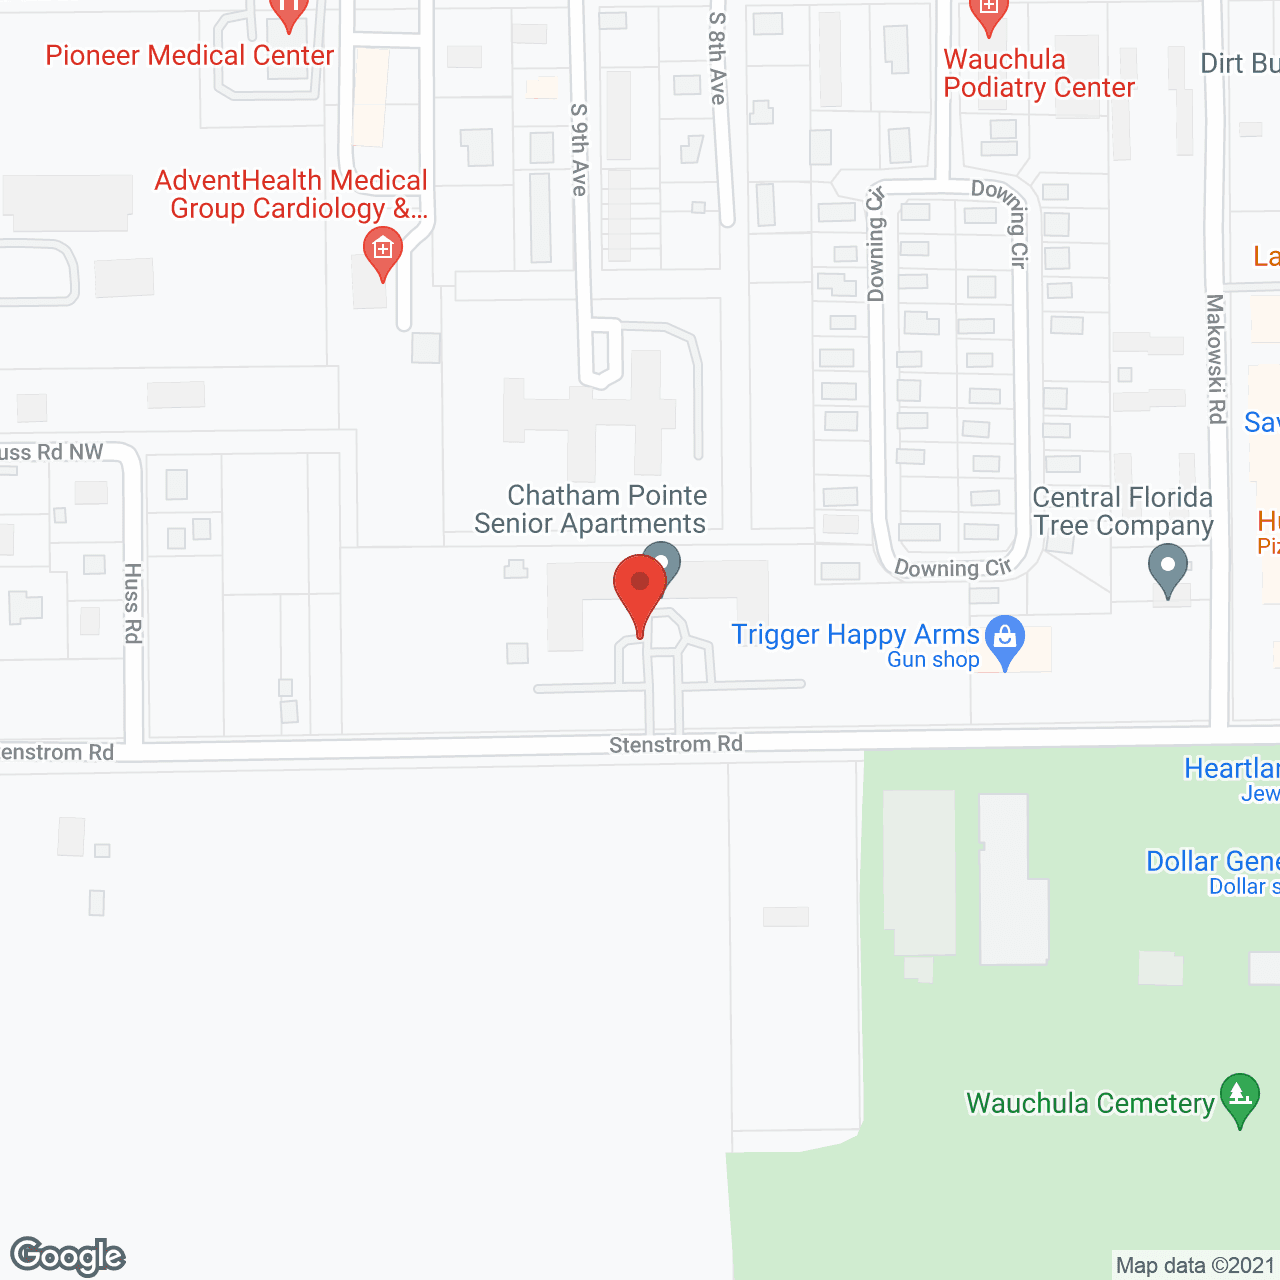 Chatham Pointe in google map